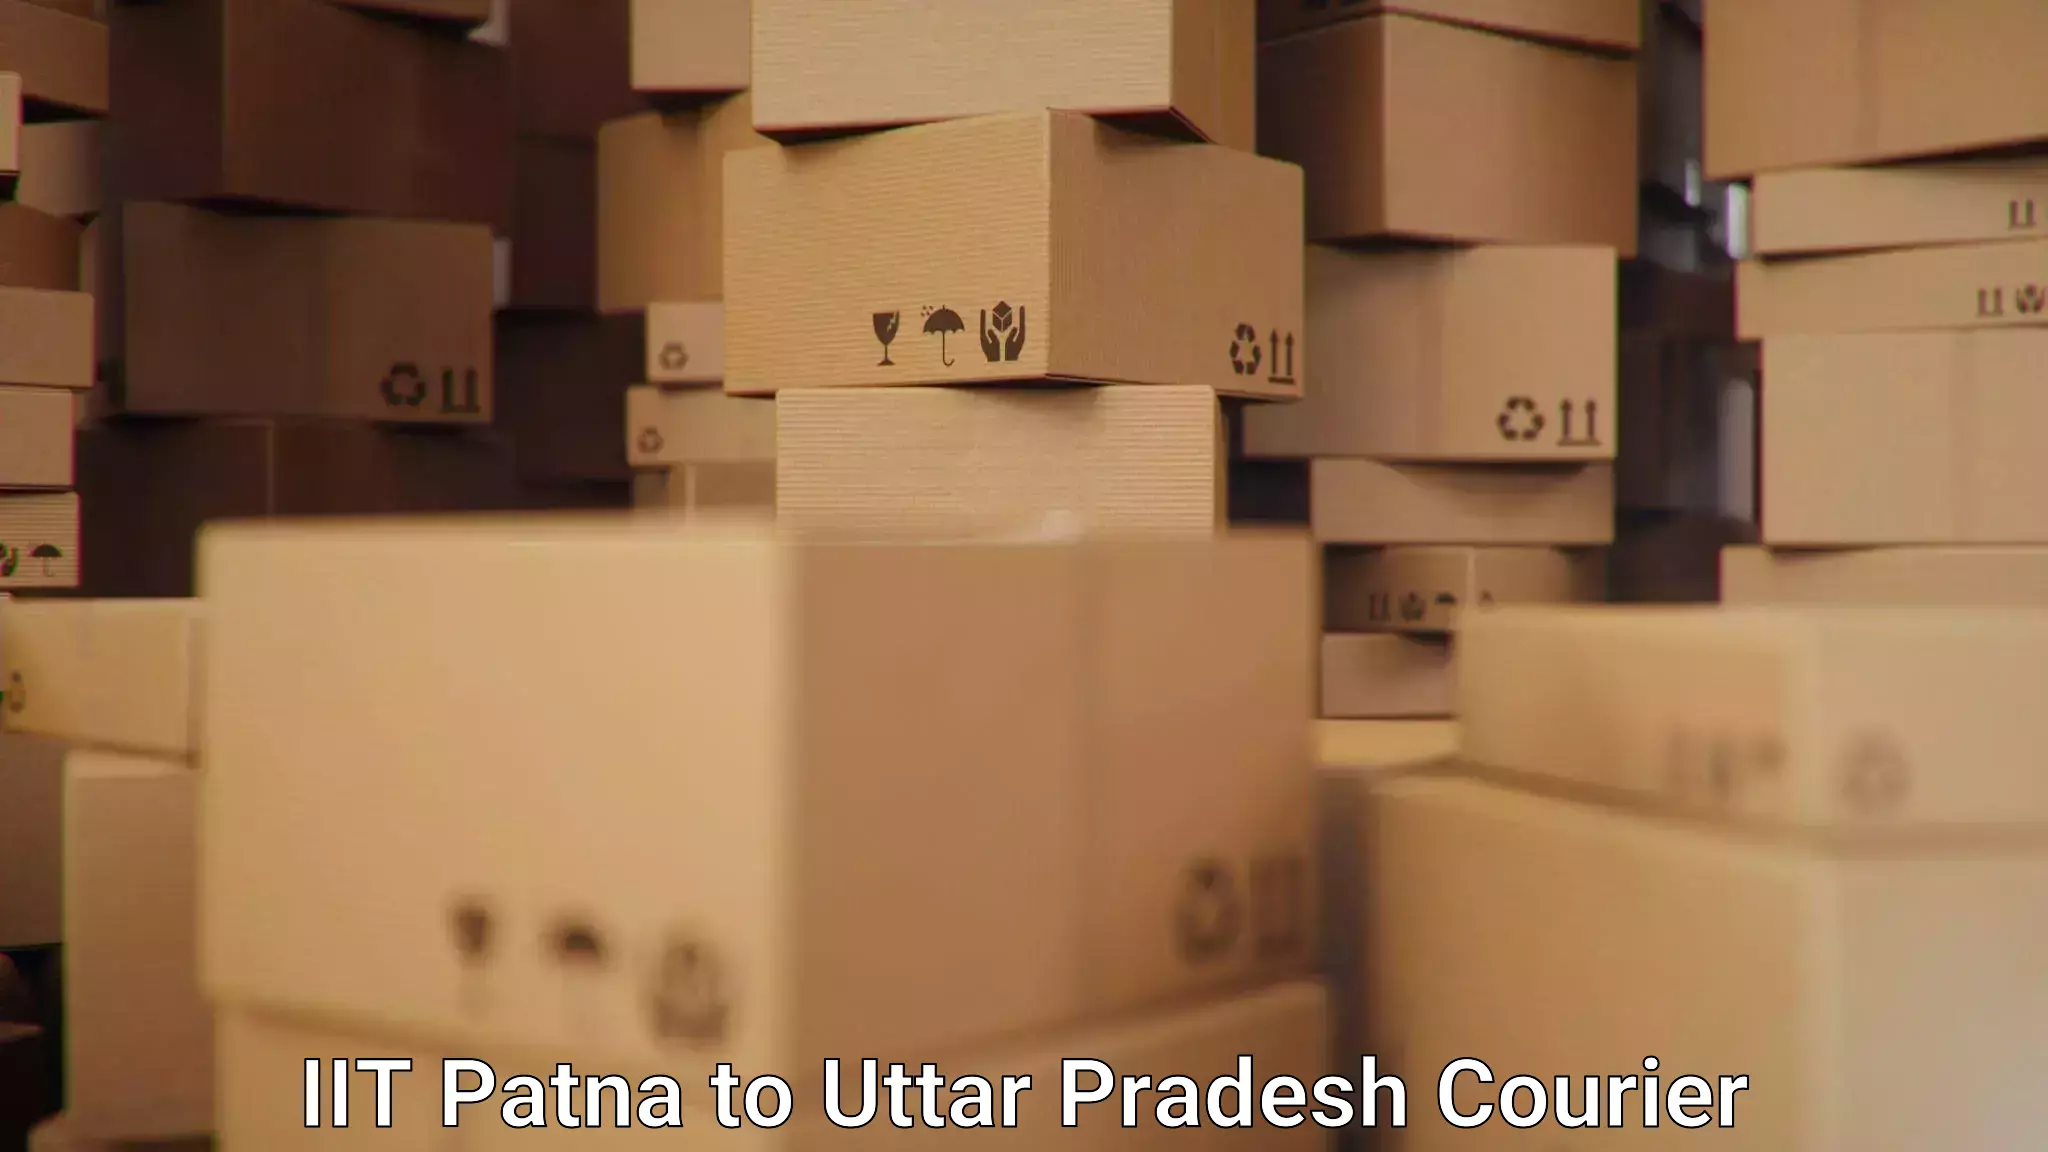 Personal courier services IIT Patna to Ghaziabad